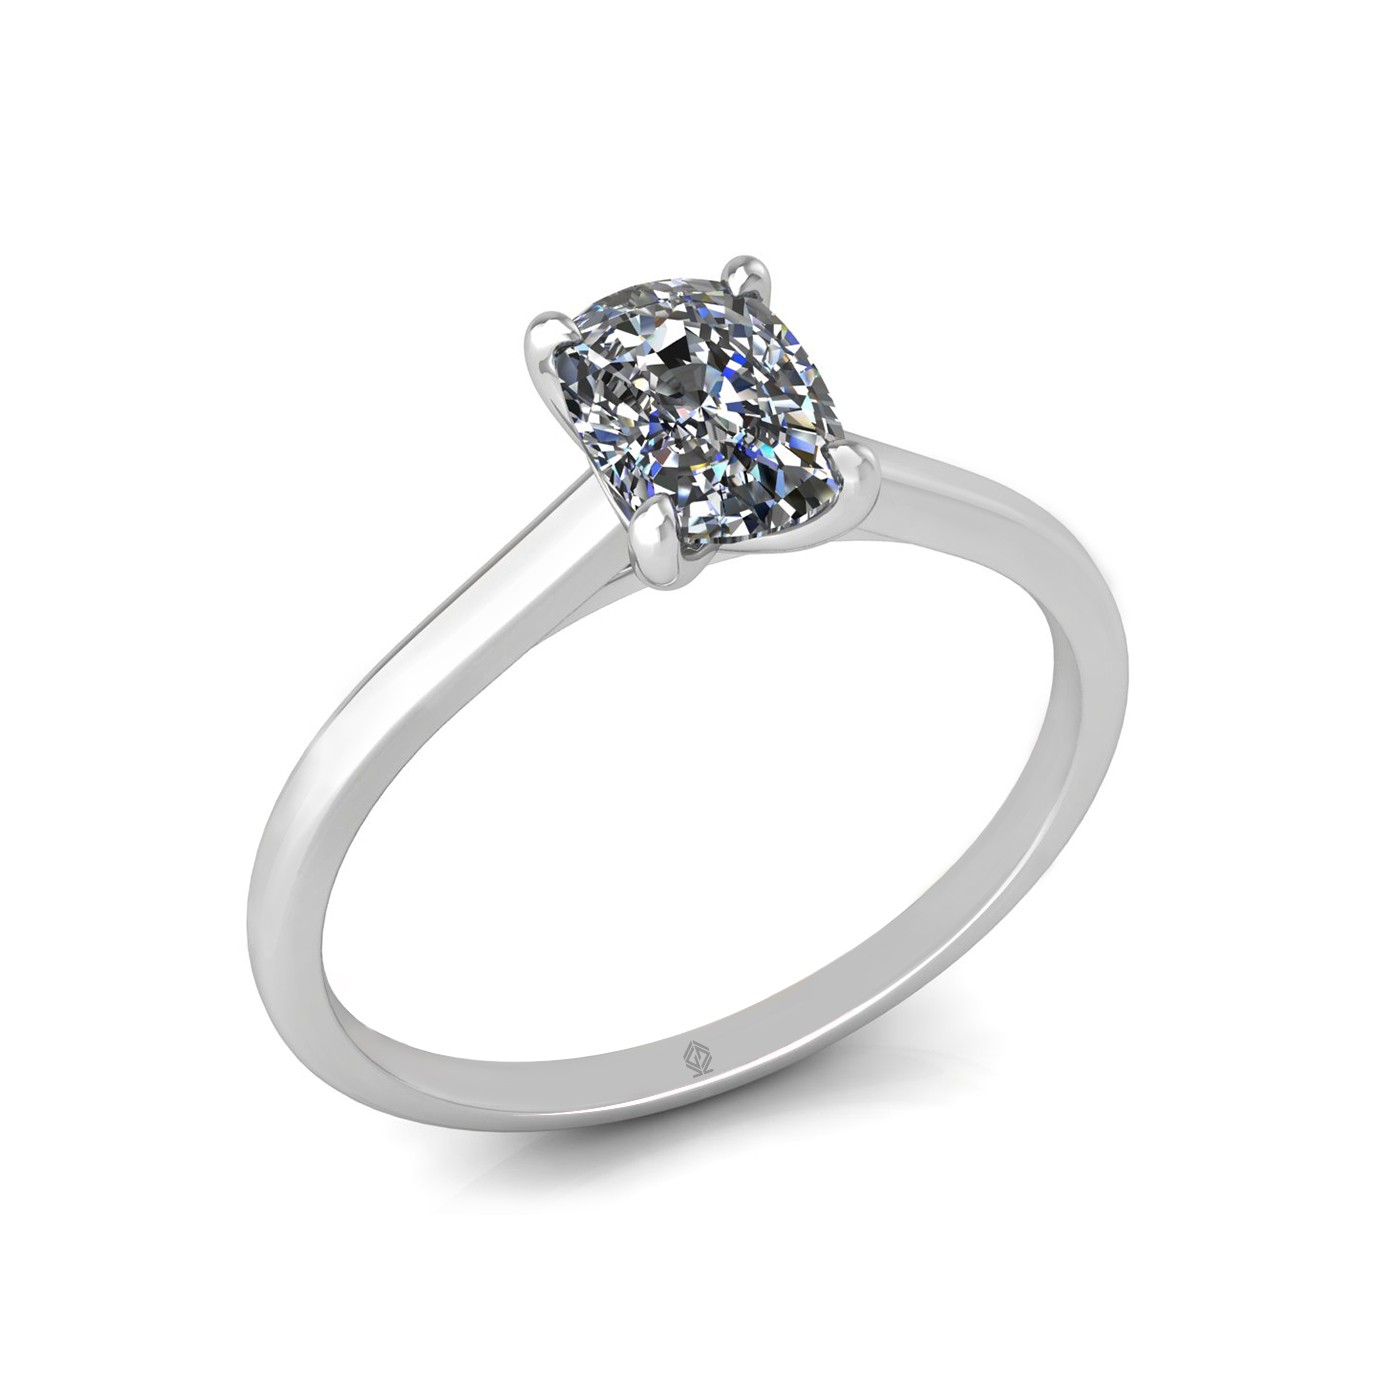 18k white gold 1,00 ct 4 prongs solitaire elongated cushion cut diamond engagement ring with whisper thin band